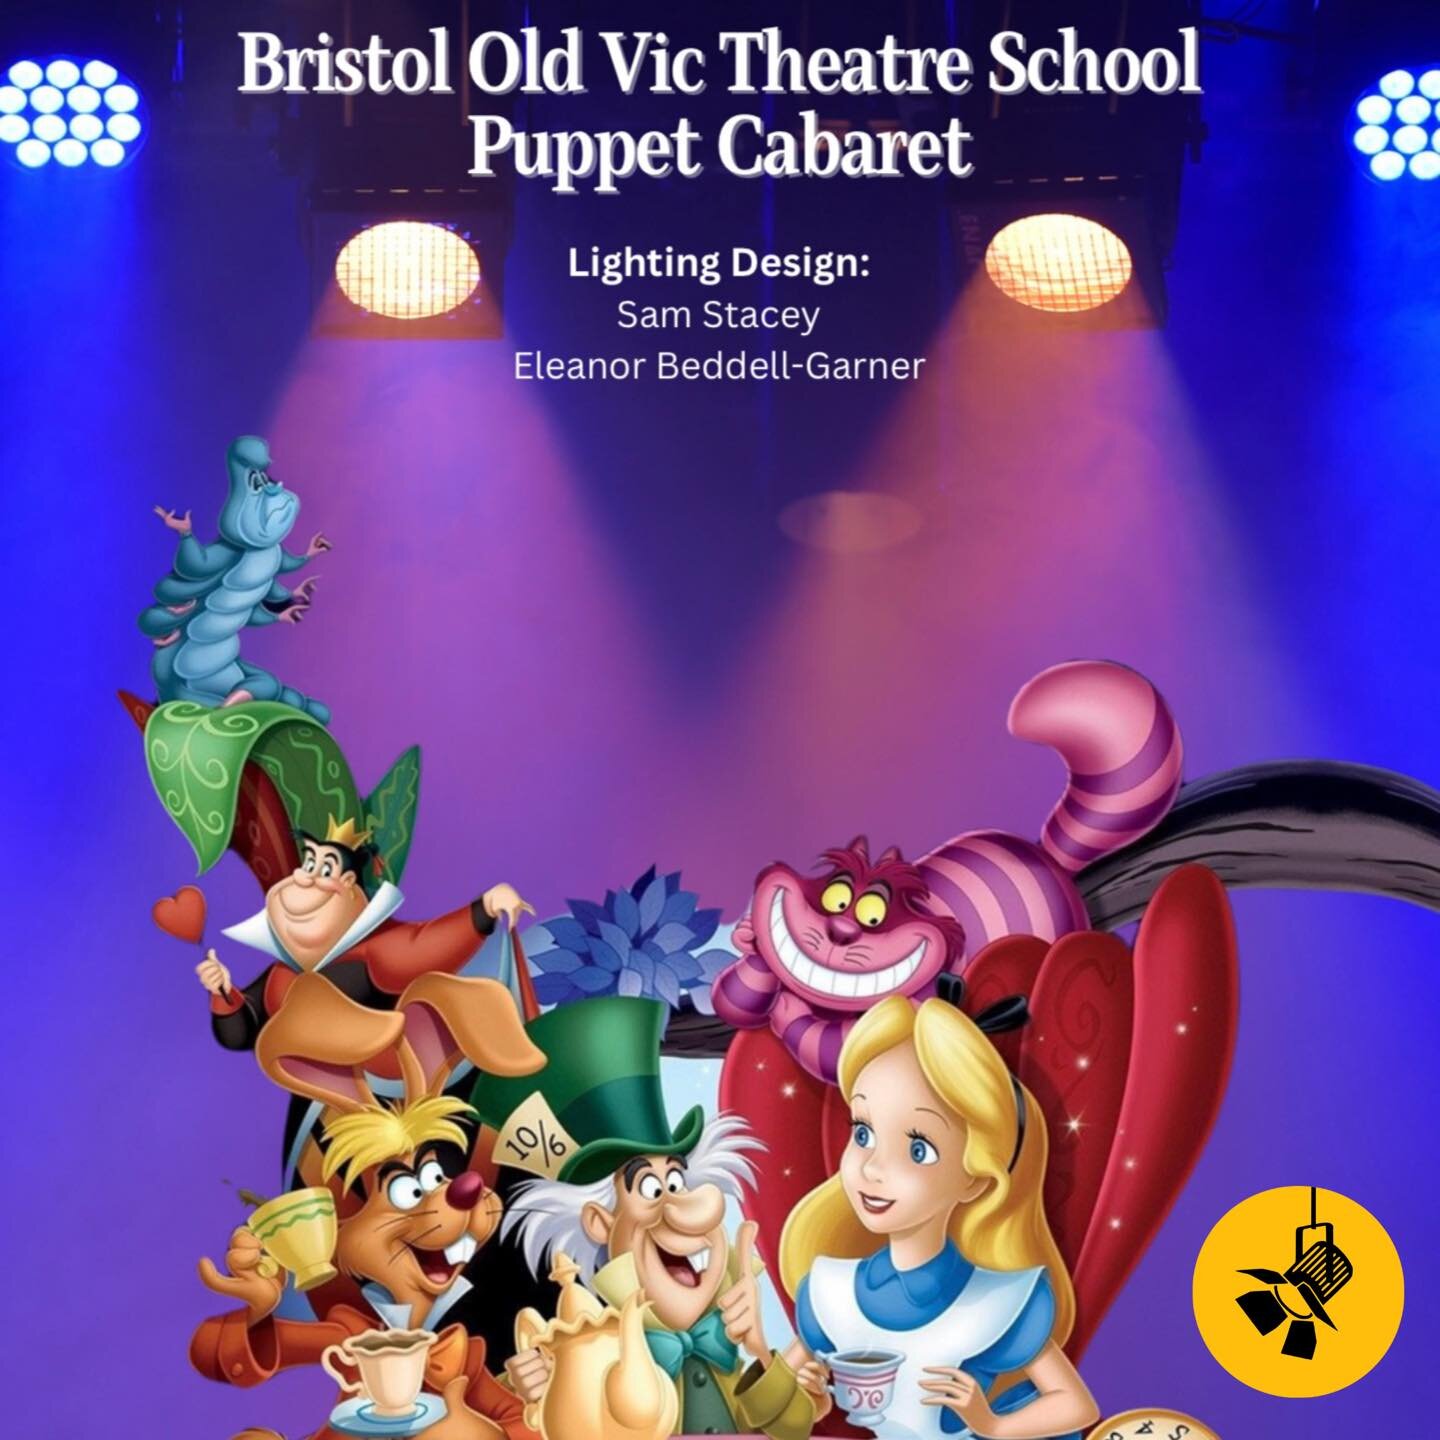 We&rsquo;re pleased to support Sam Stacey in his first LD role at Bristol Old Vic Theatre School by supplying Martin Aura XB&rsquo;s and Mac Quantums to their production of Alice in wonderland!

Good luck with the show Sam Stacey!